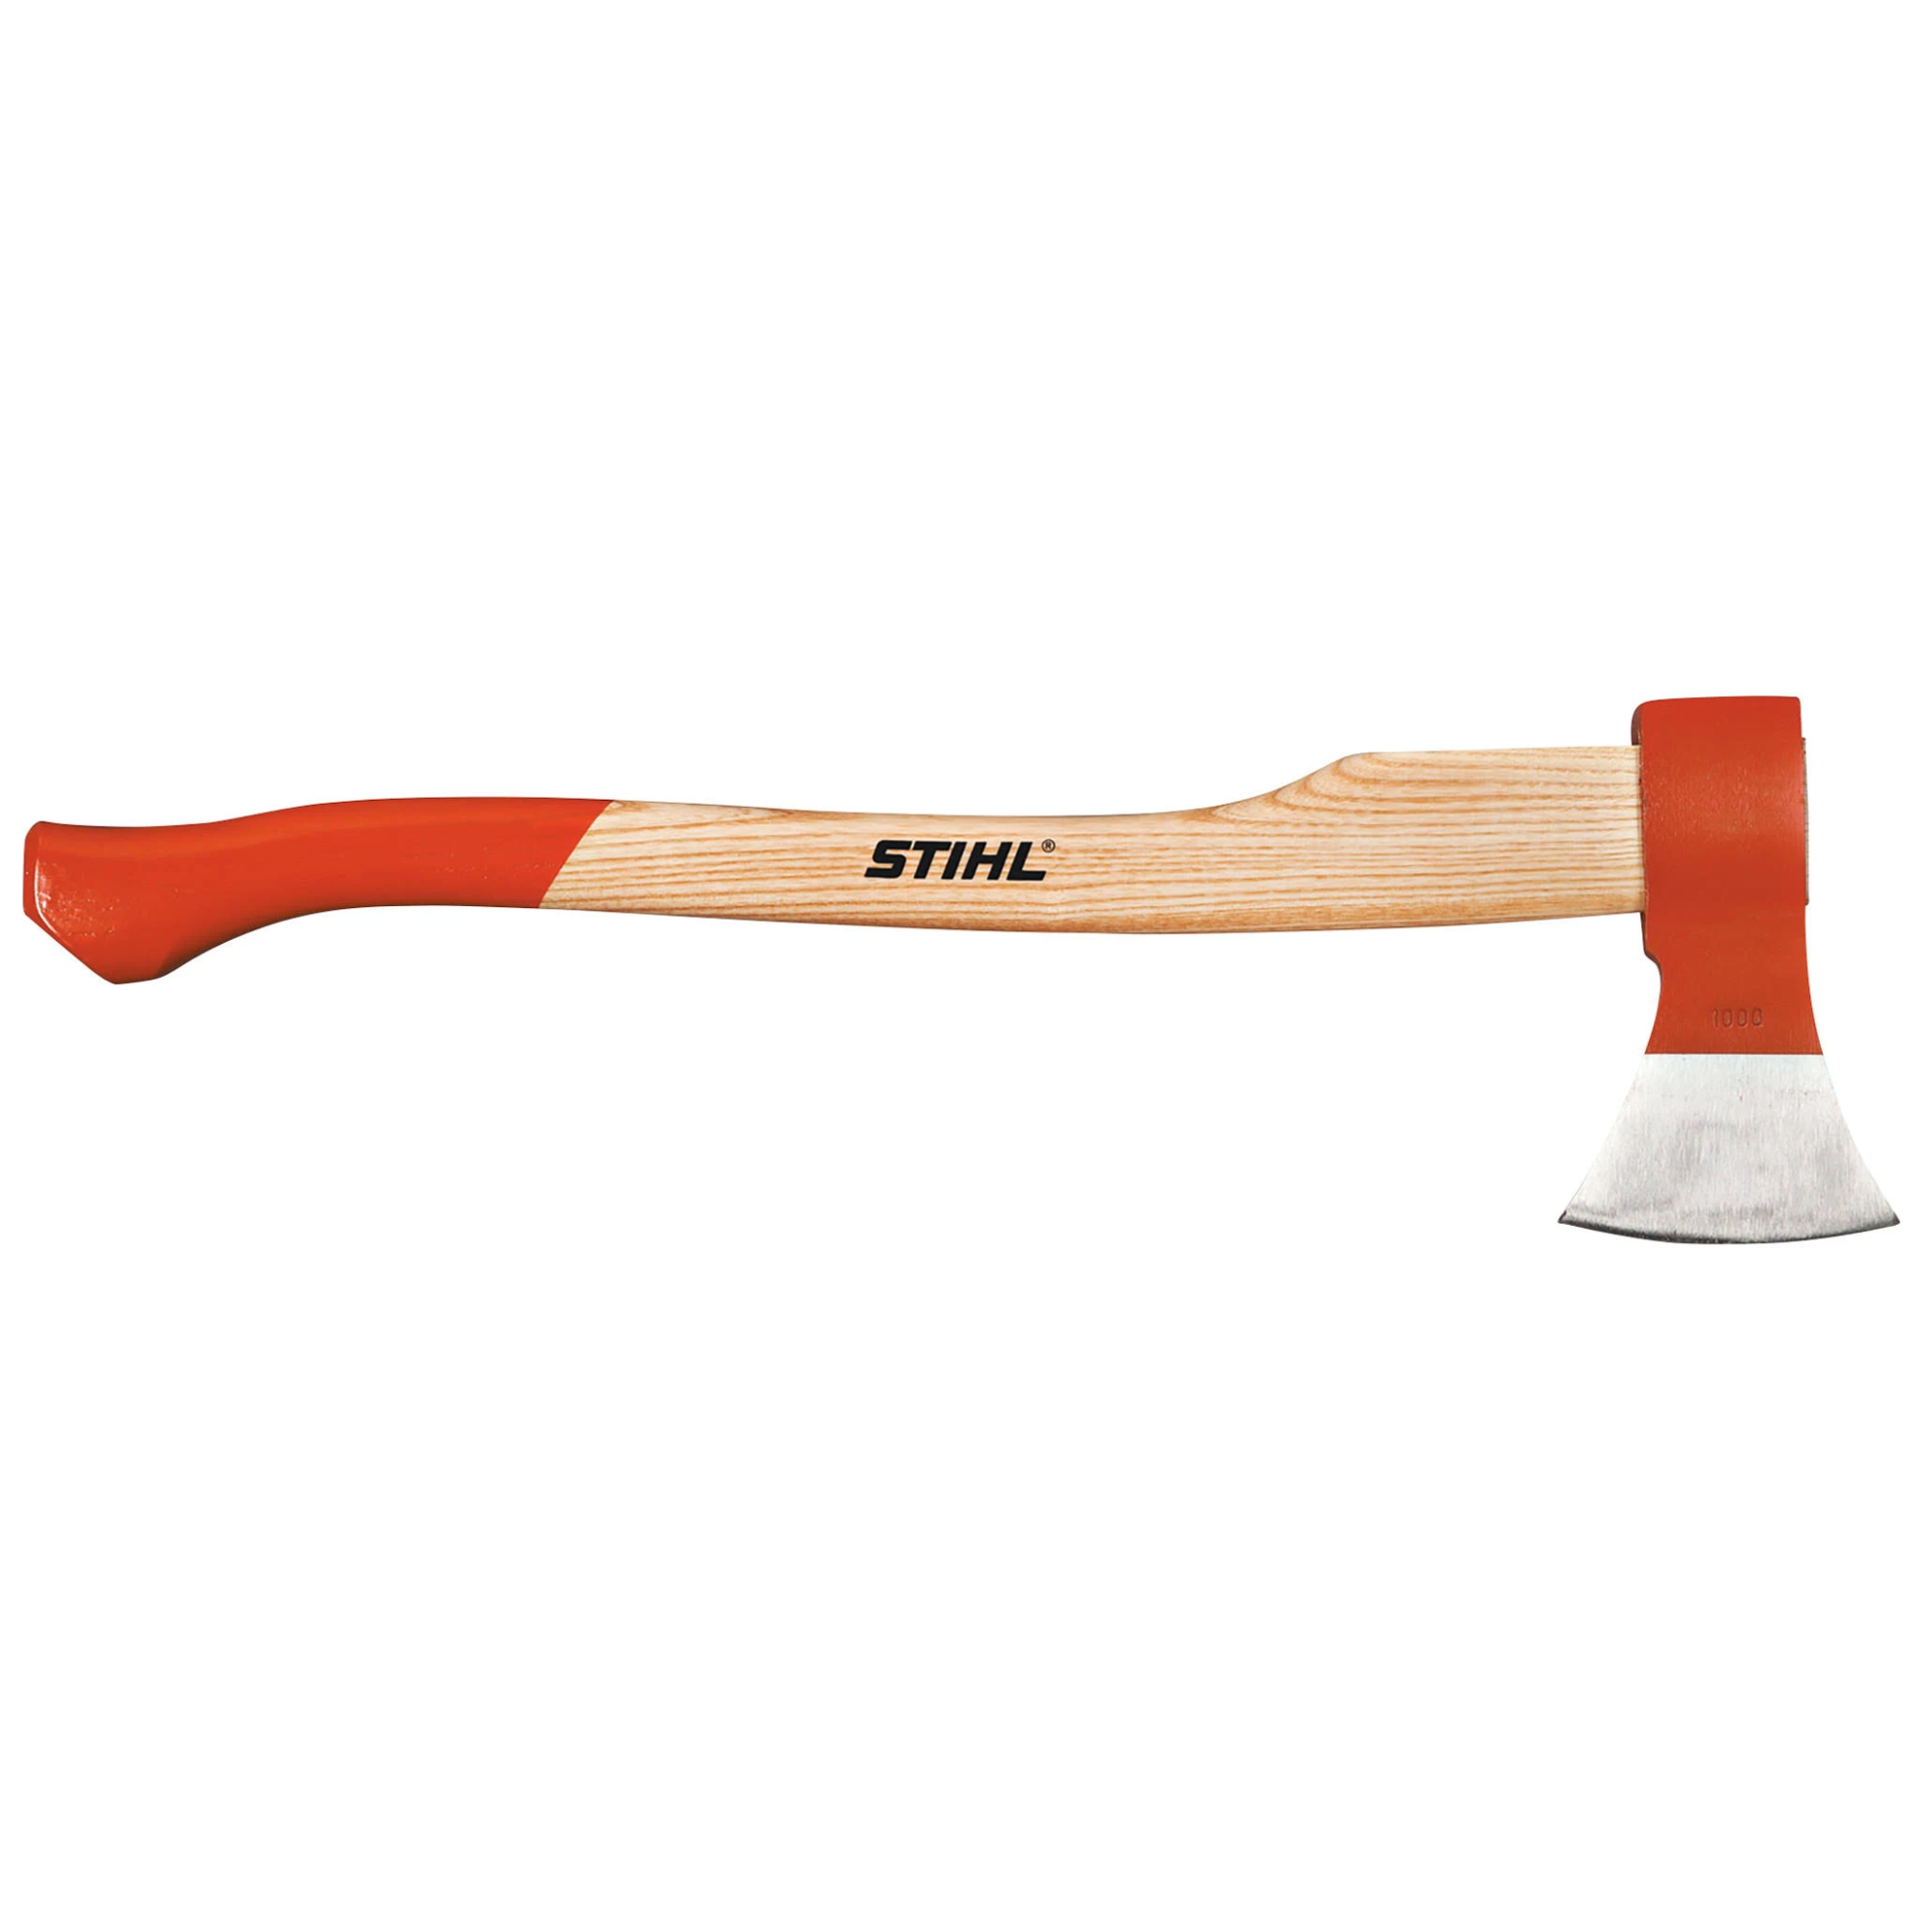 Stihl Woodcutter Universal Forestry Axe | 7010 881 1907